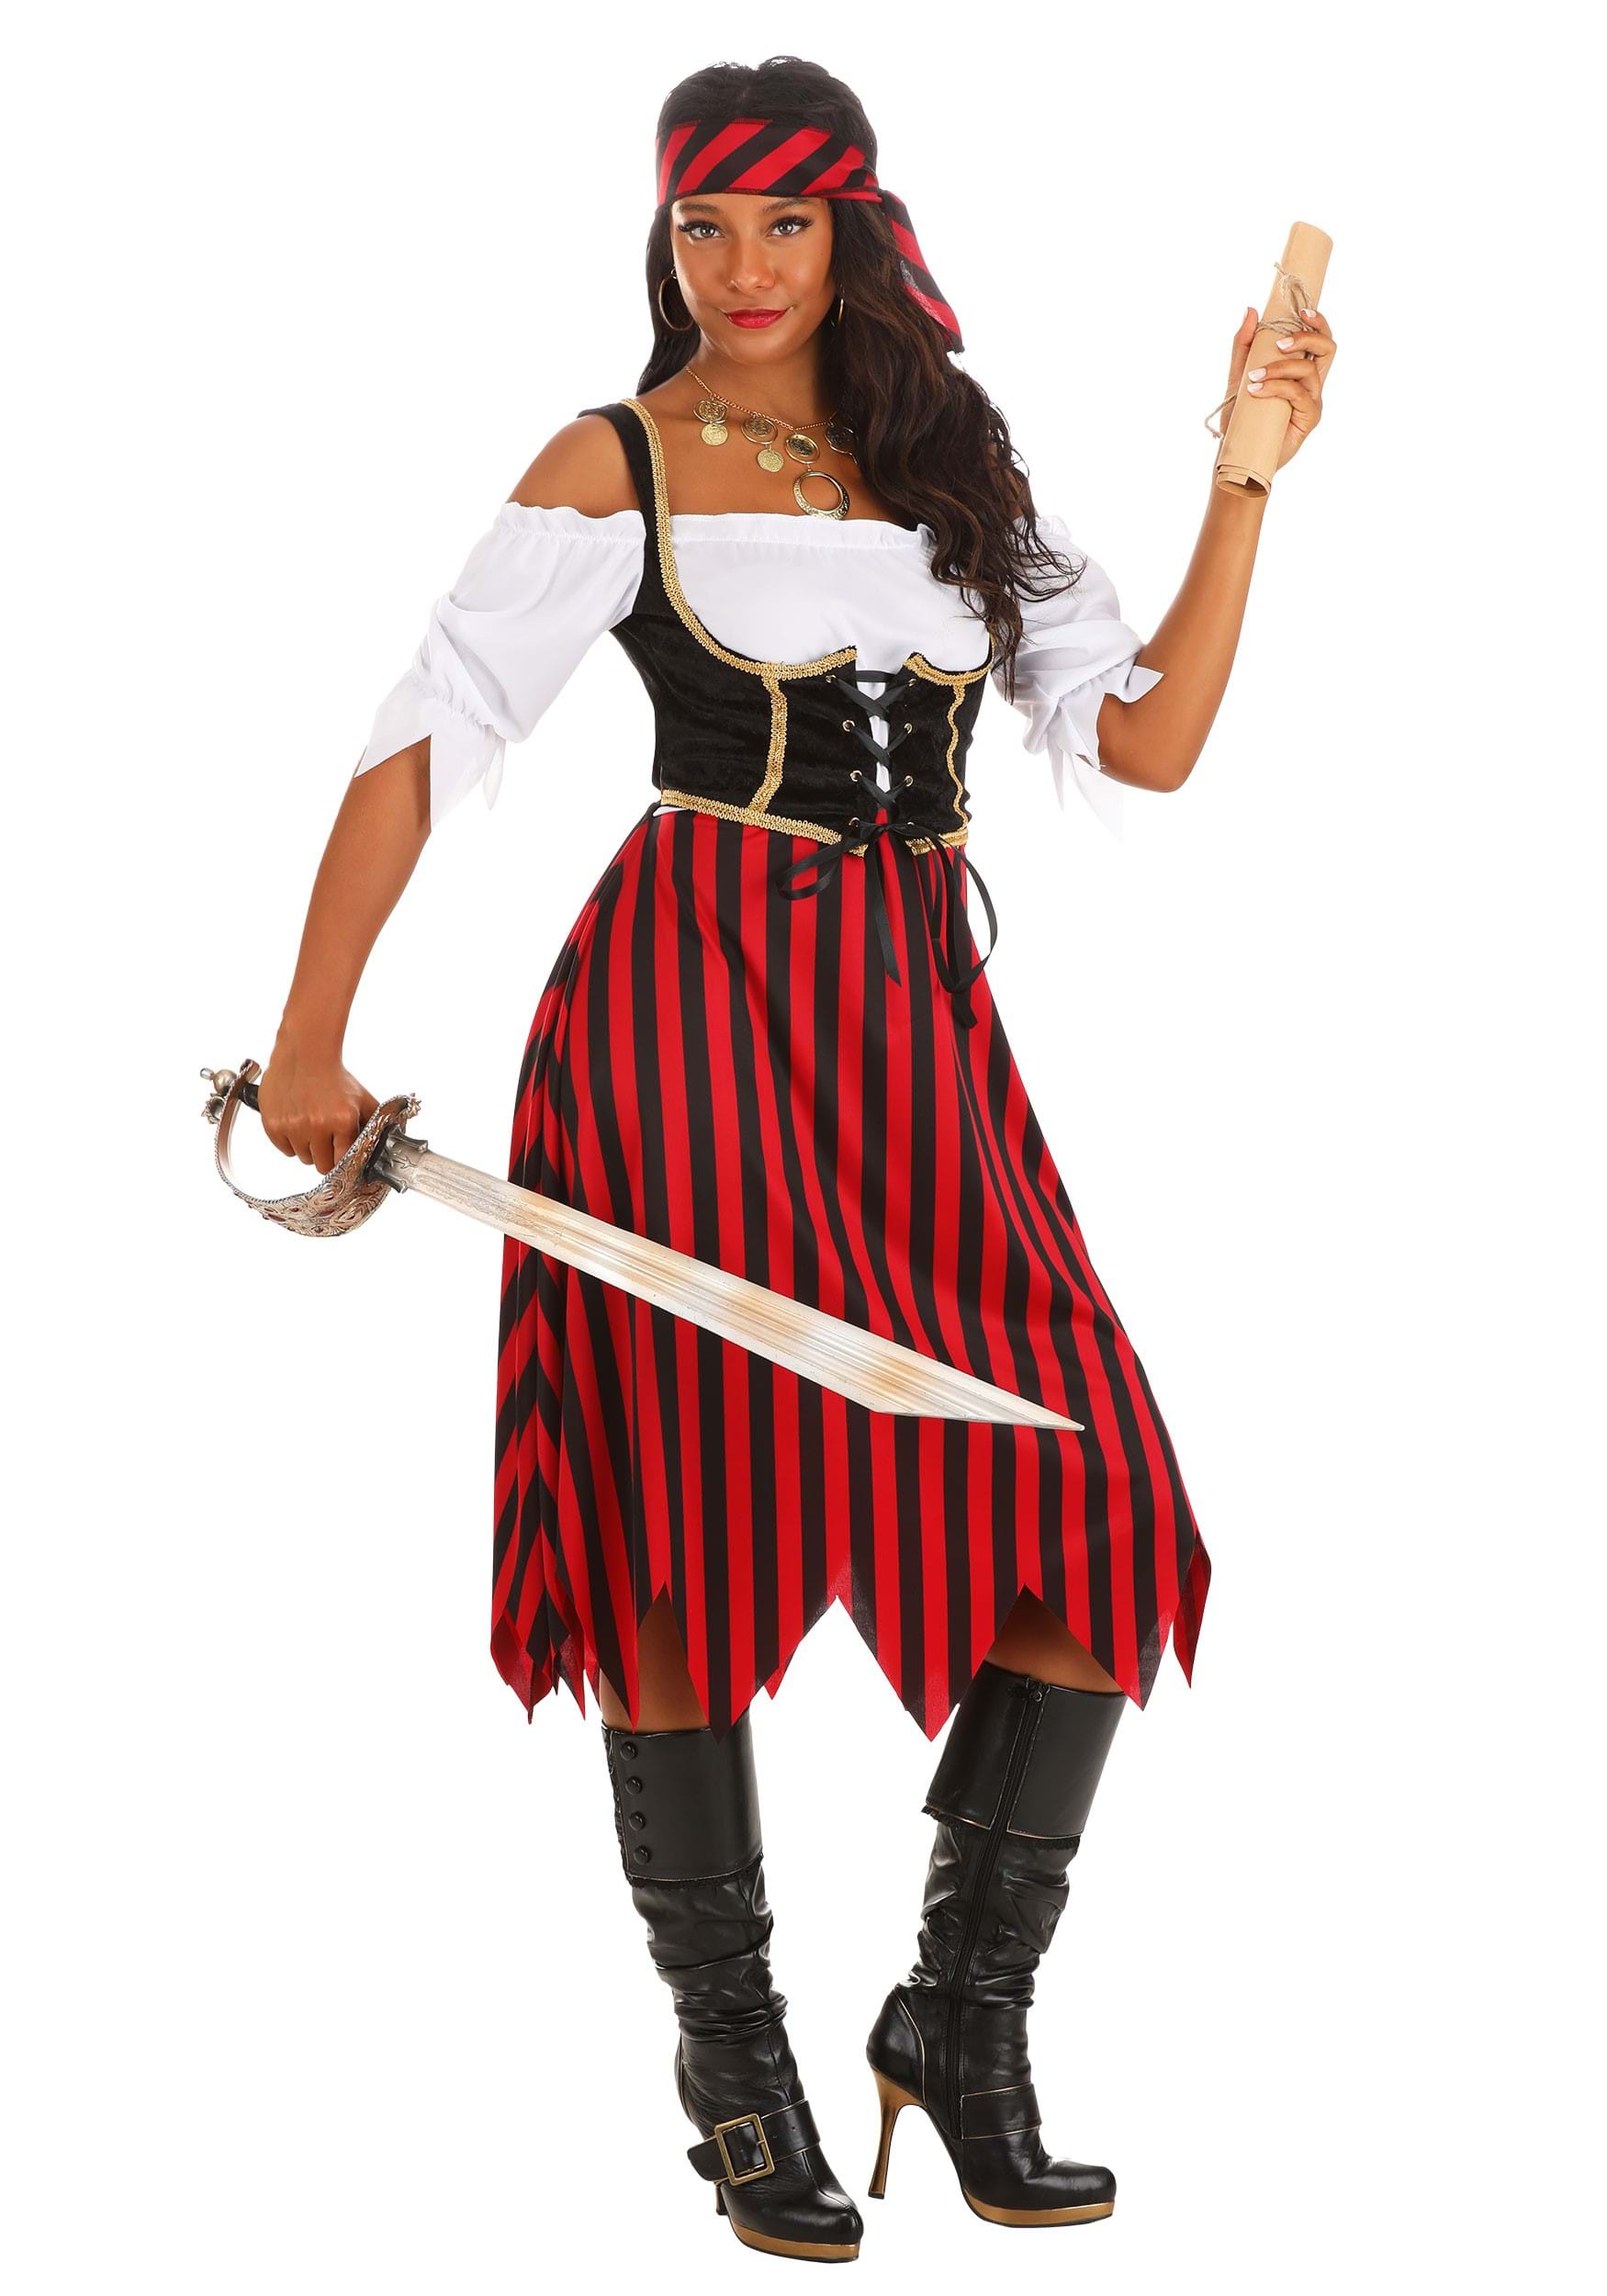 https://images.halloweencostumes.com/products/81223/1-1/adult-deluxe-pirate-maiden-costume.jpg